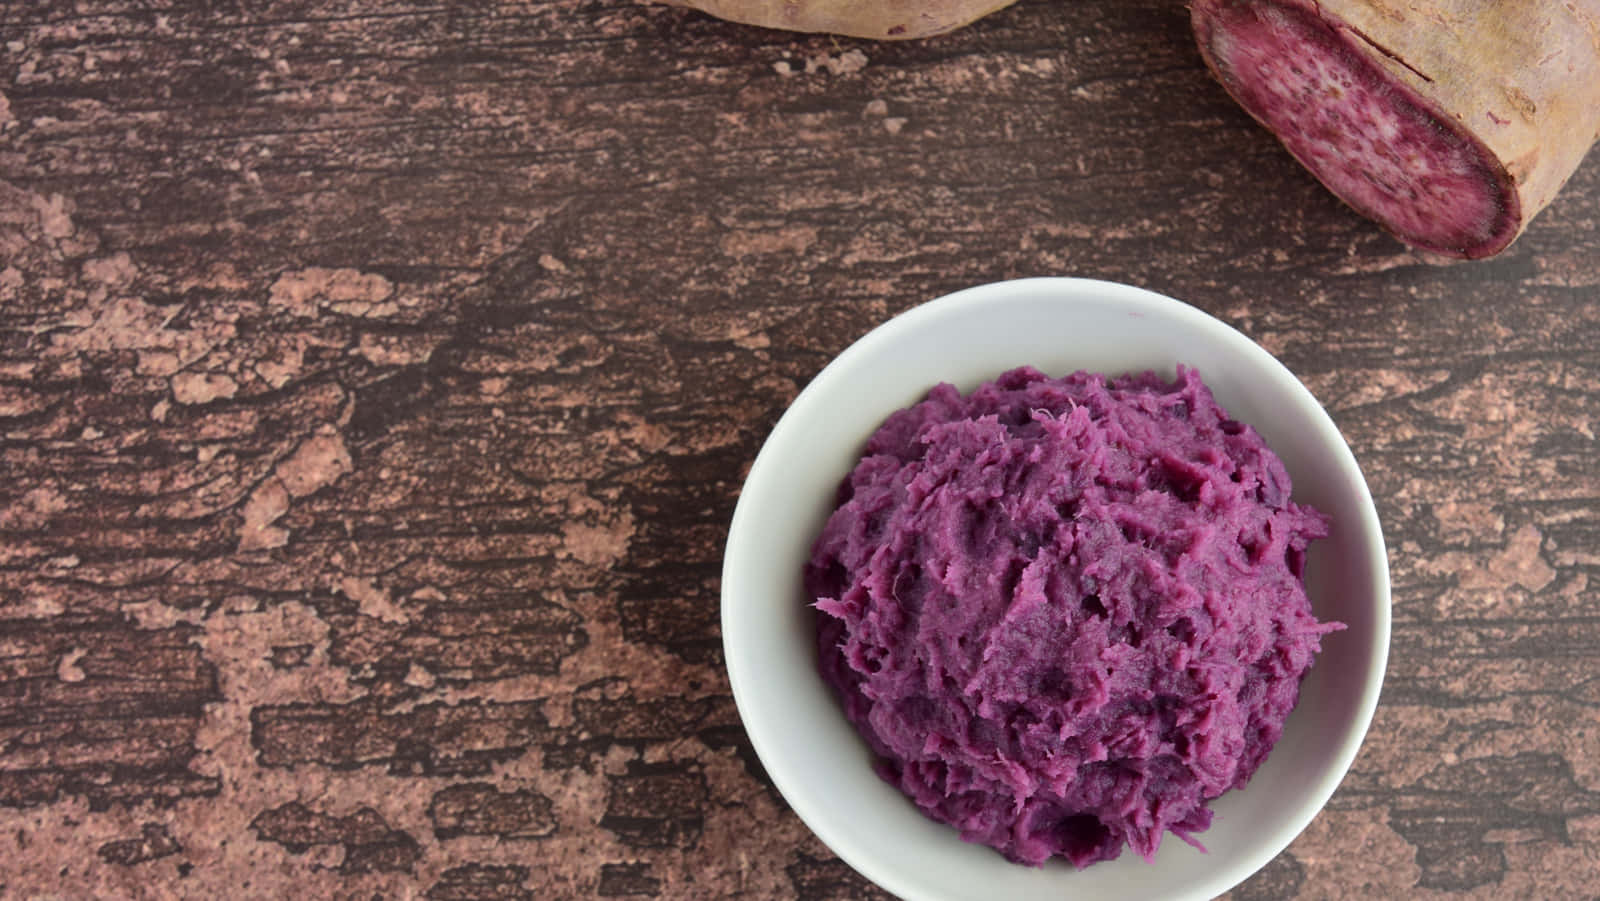 A Delicious Snack Made with Purple Sweet Potato Wallpaper